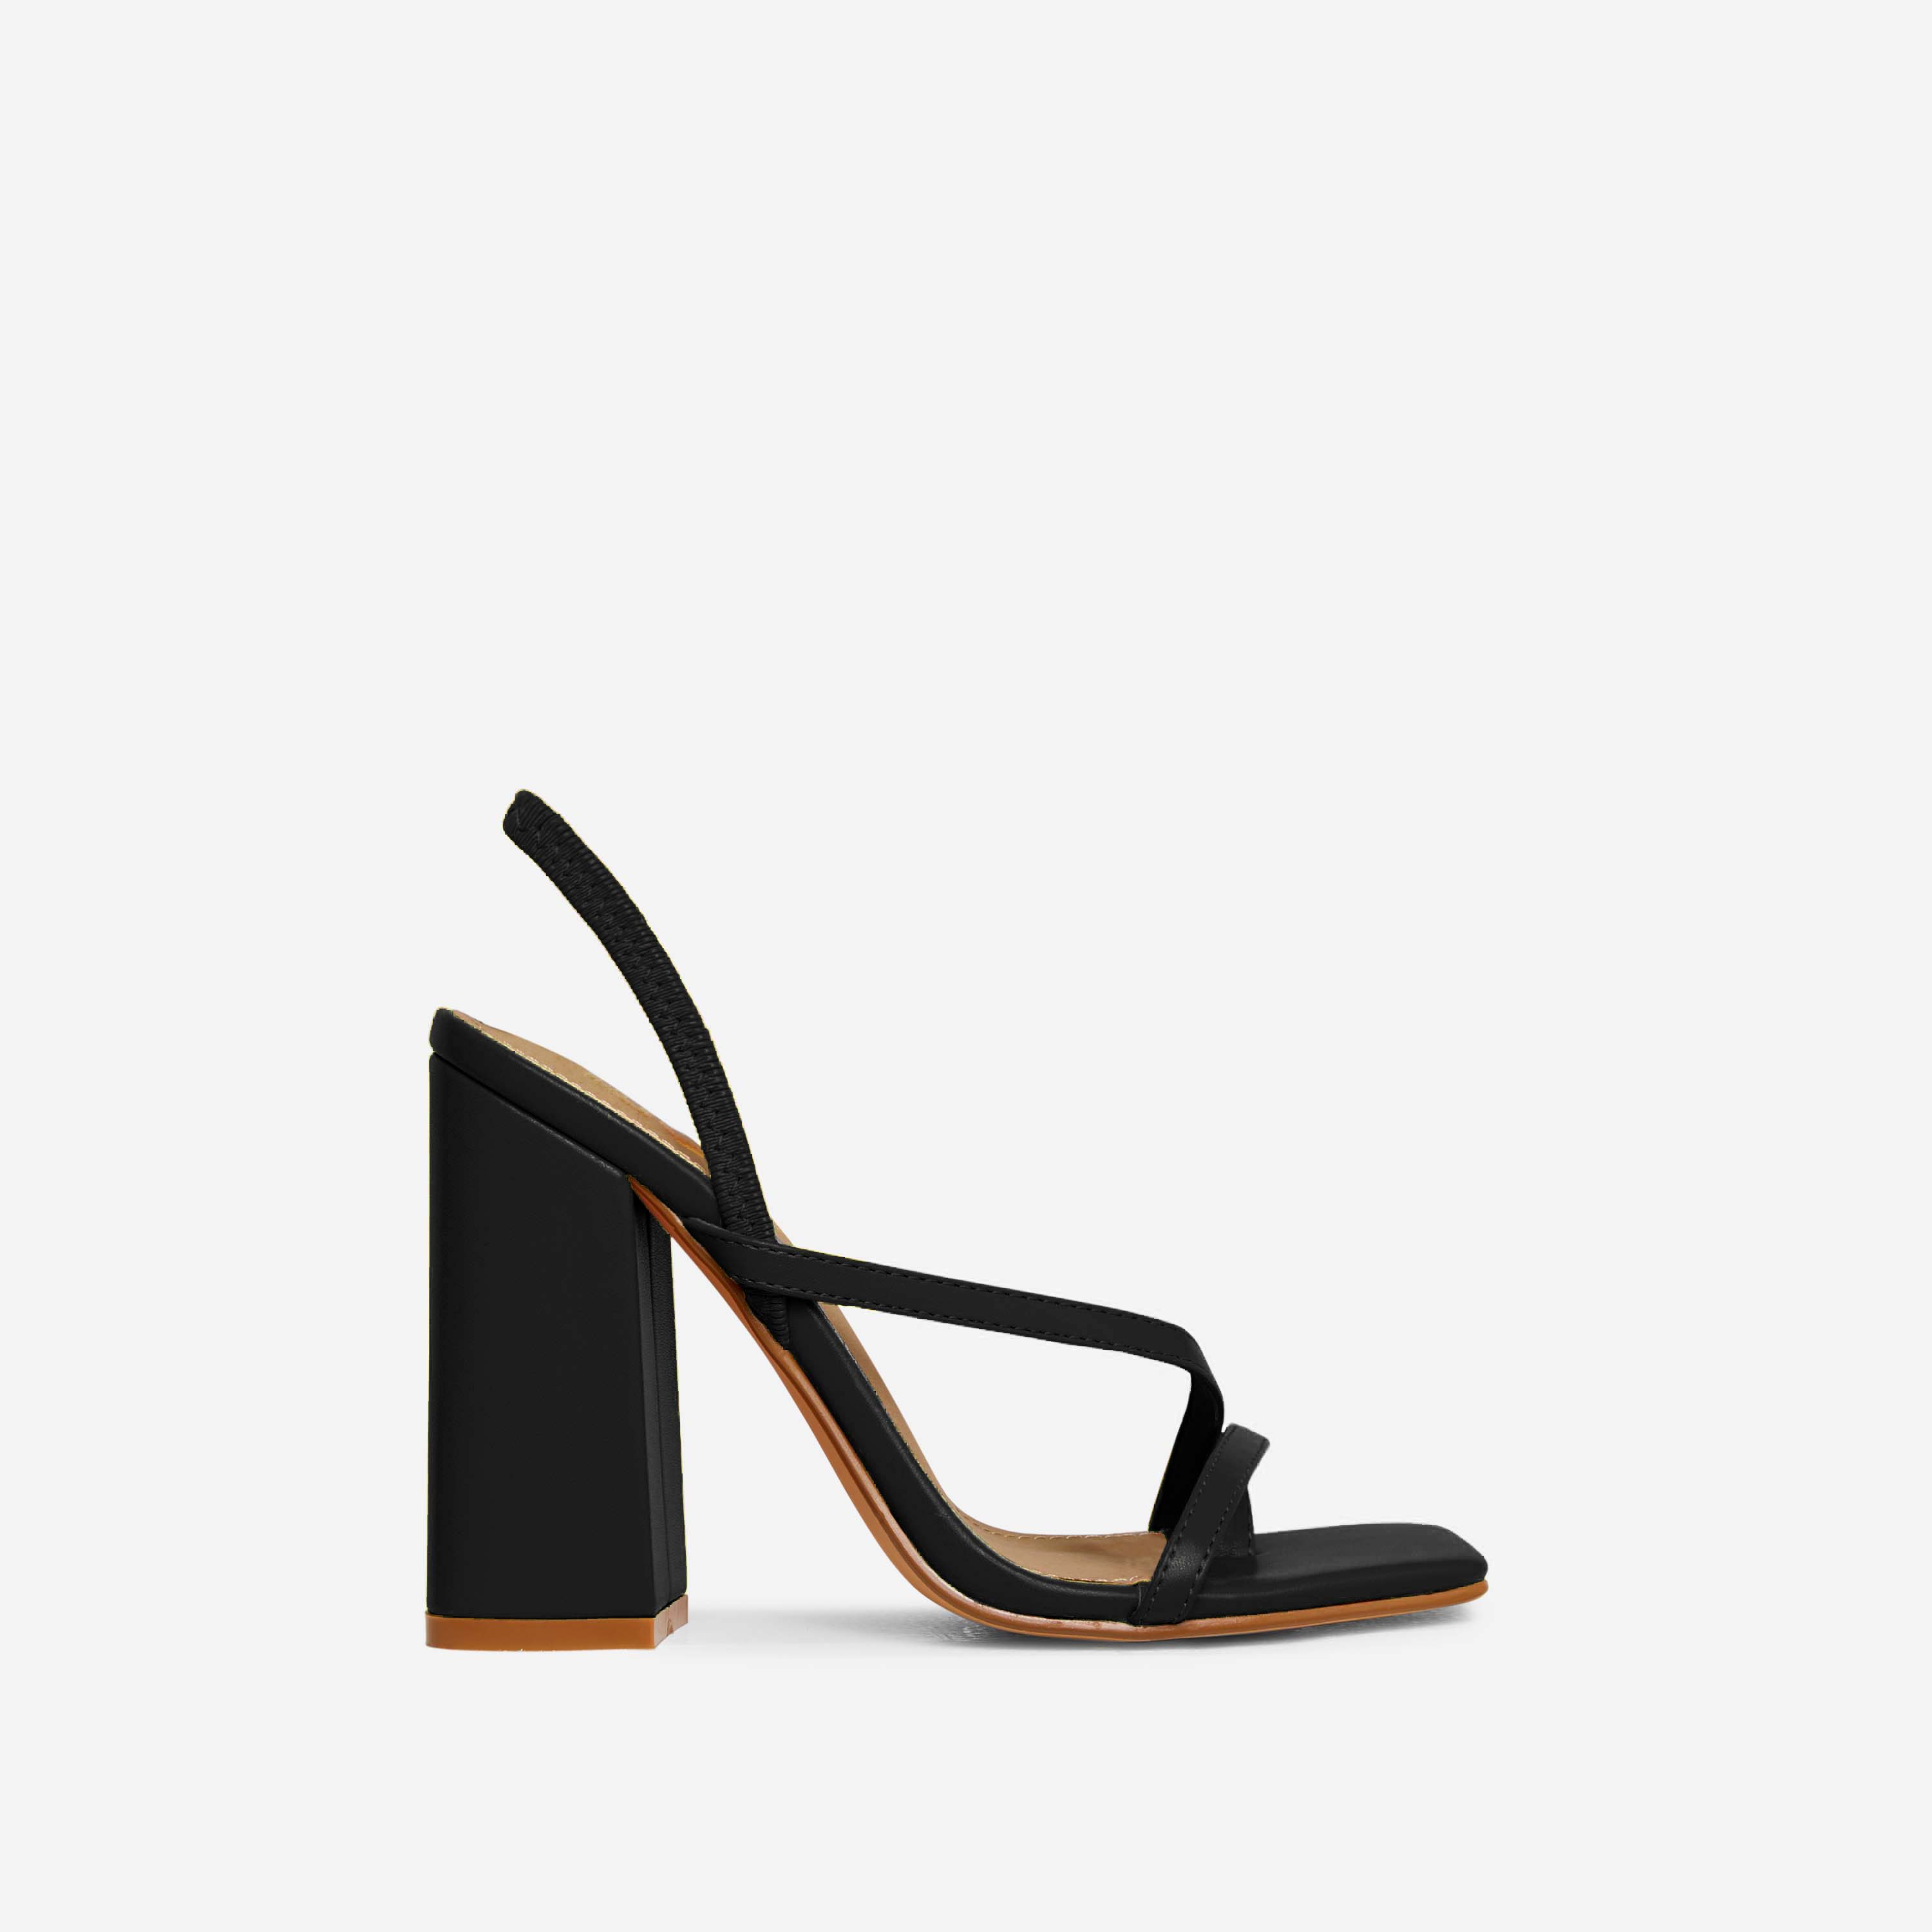 Wyoming Strappy Square Toe Slingback Block Heel In Black Faux Leather, Black